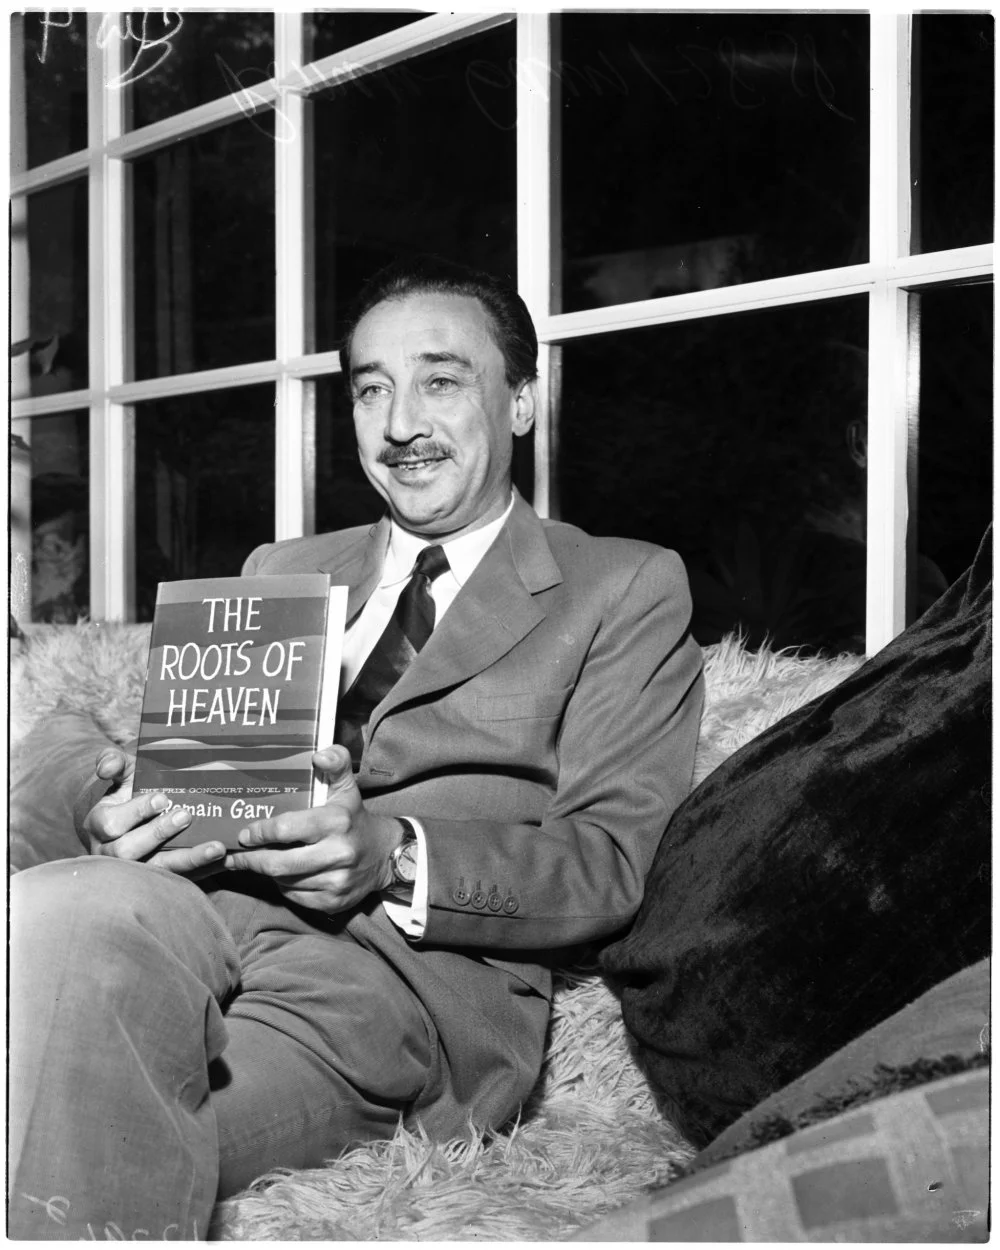 French consul general, Romain Gary (French consul general) with his book 'The Roots of Heaven', January 28, 1958/Getty Images